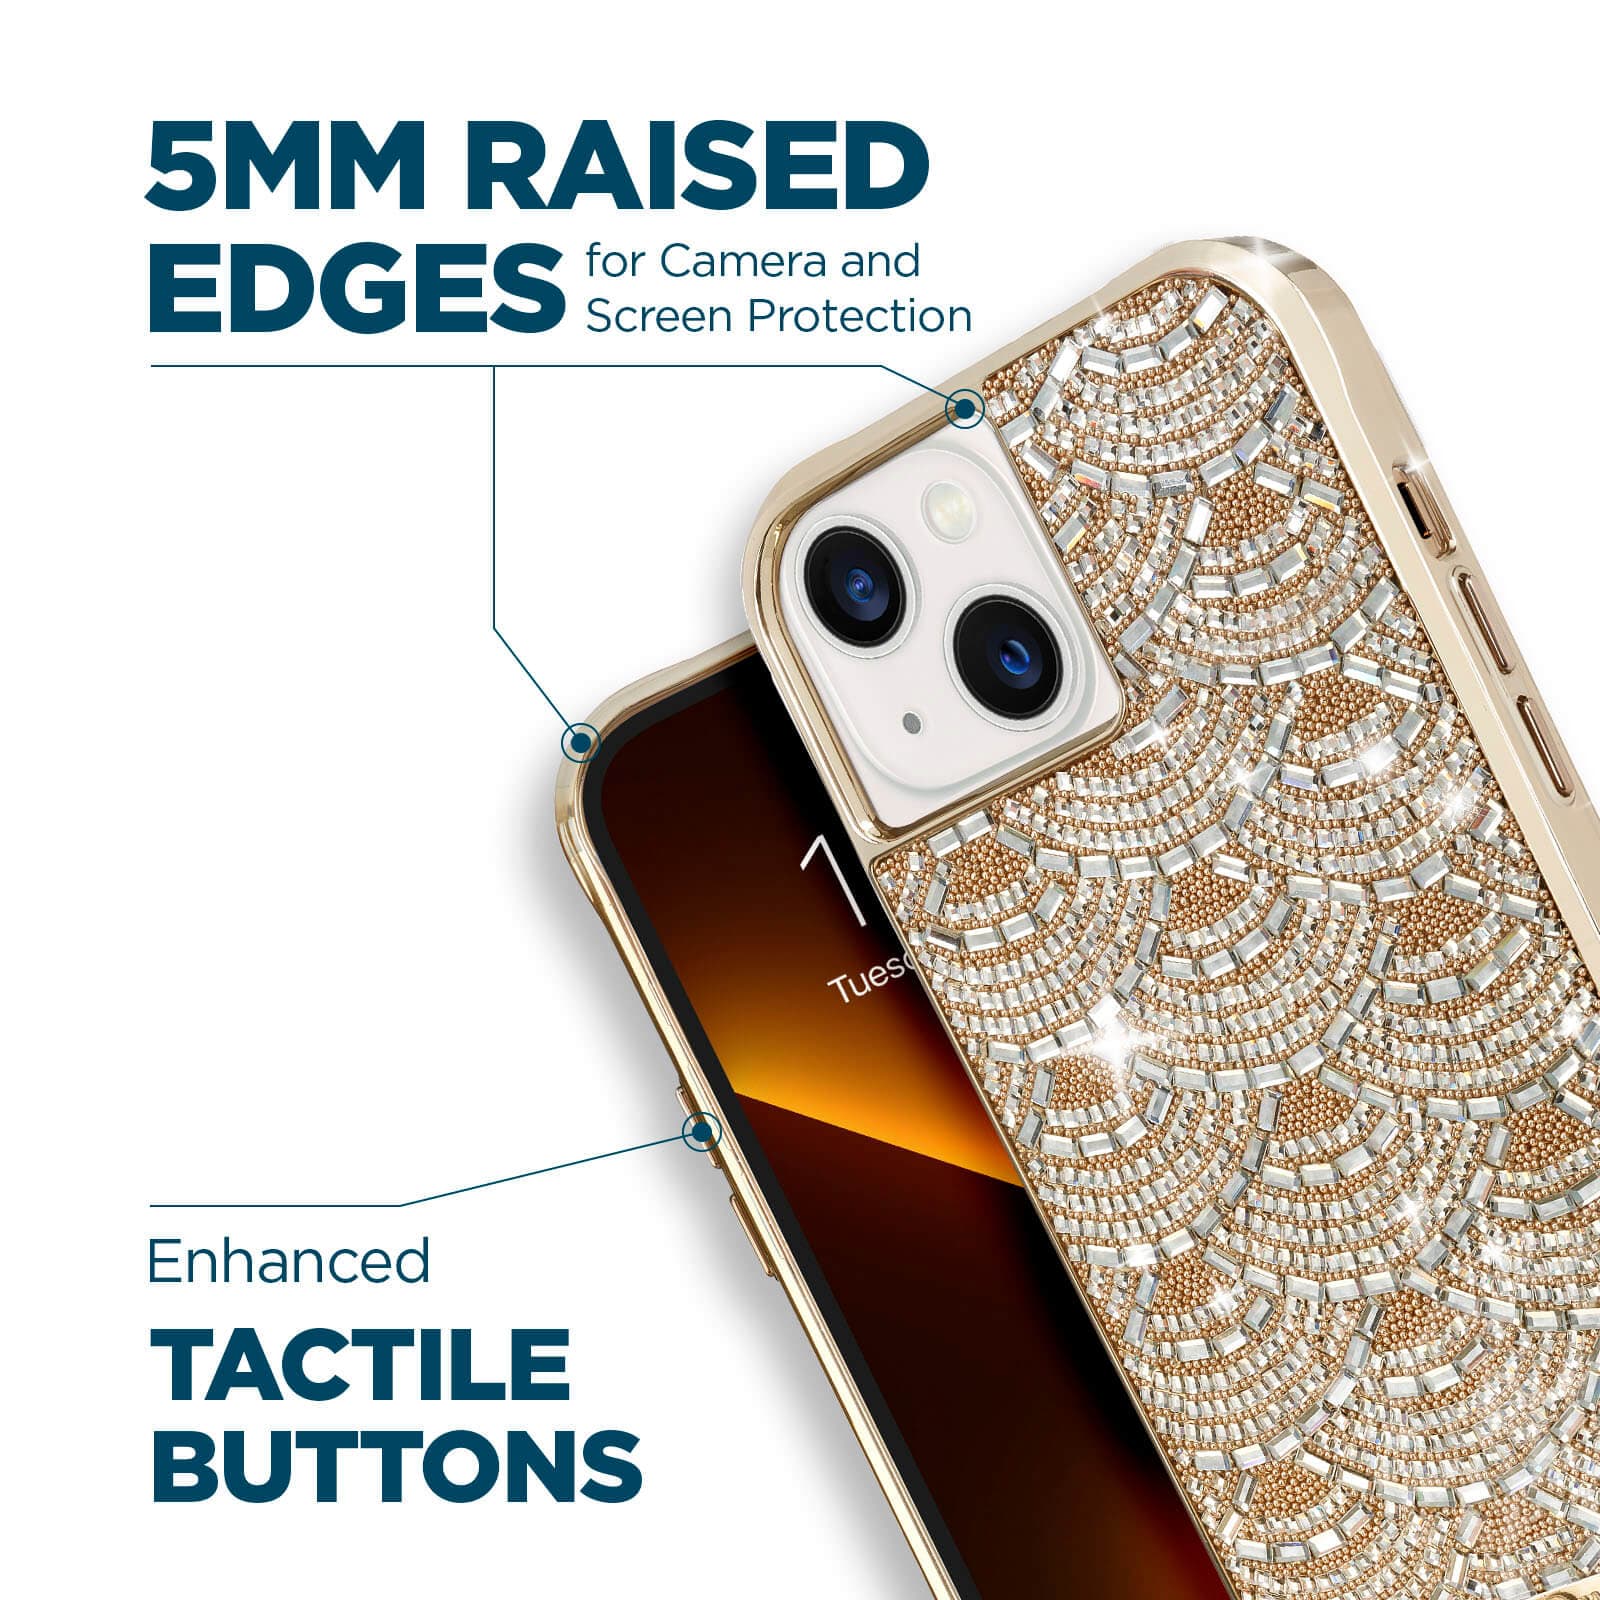 5mm raised edges for camera and screen protection. Enhanced tactile buttons. color::Brilliance Chandelier